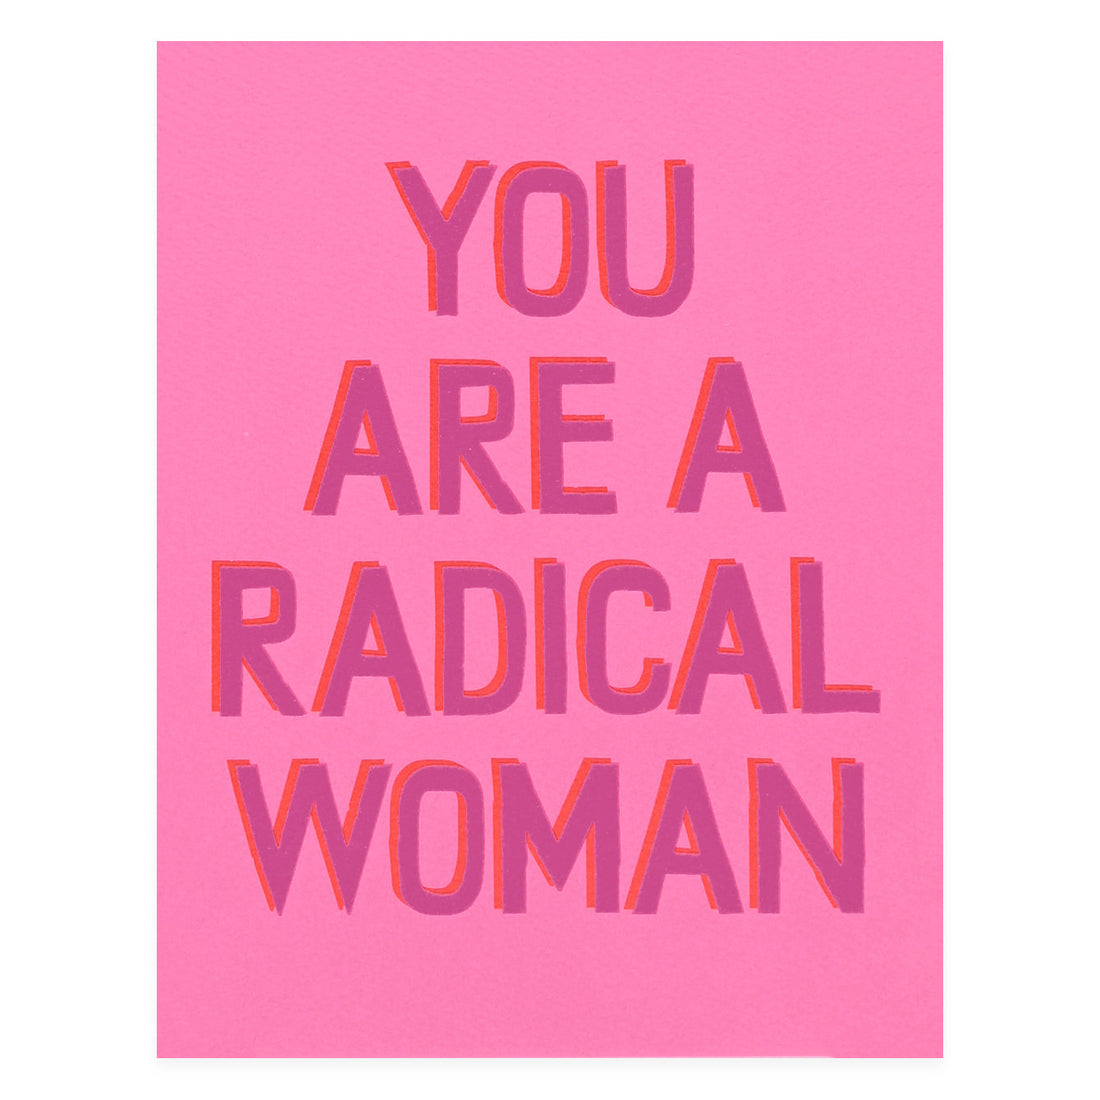 Banquet Workshop You Are A Radical Woman! Greeting Card 